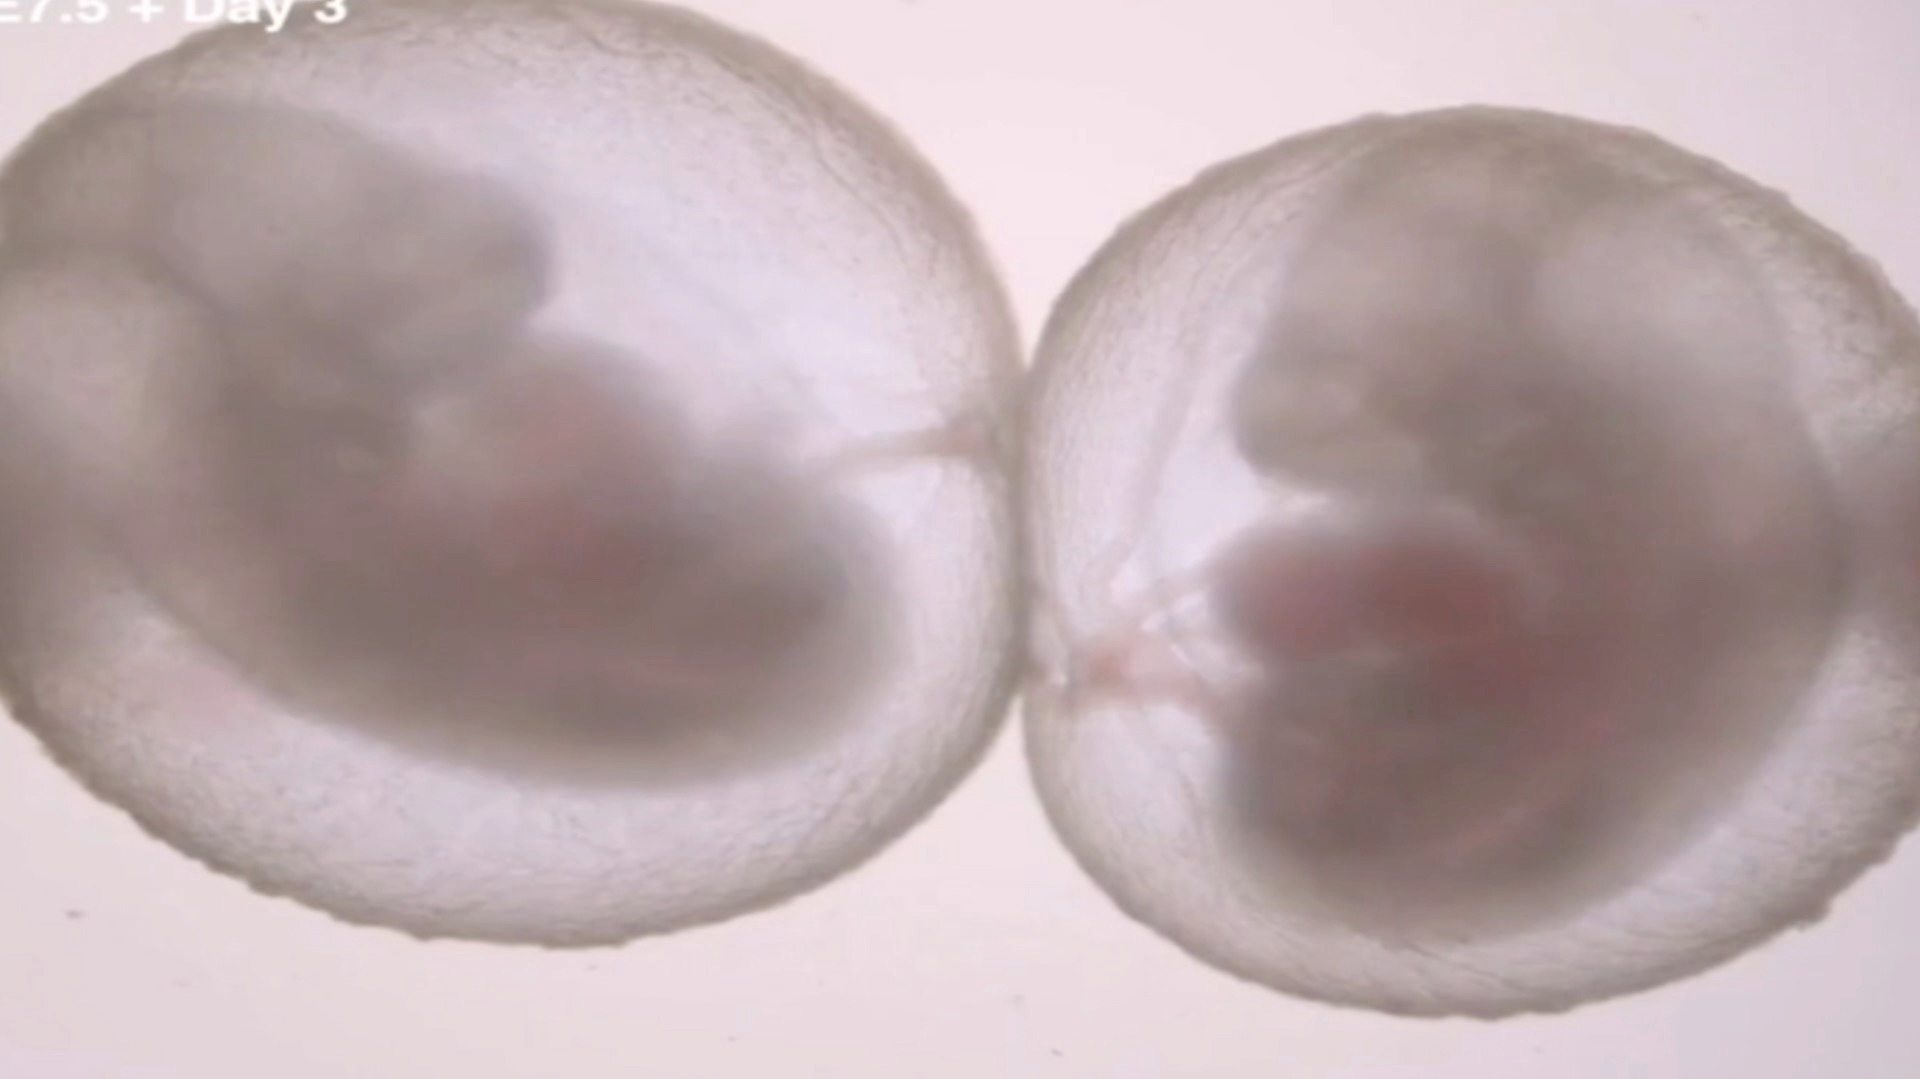 The world's first 'synthetic' embryos